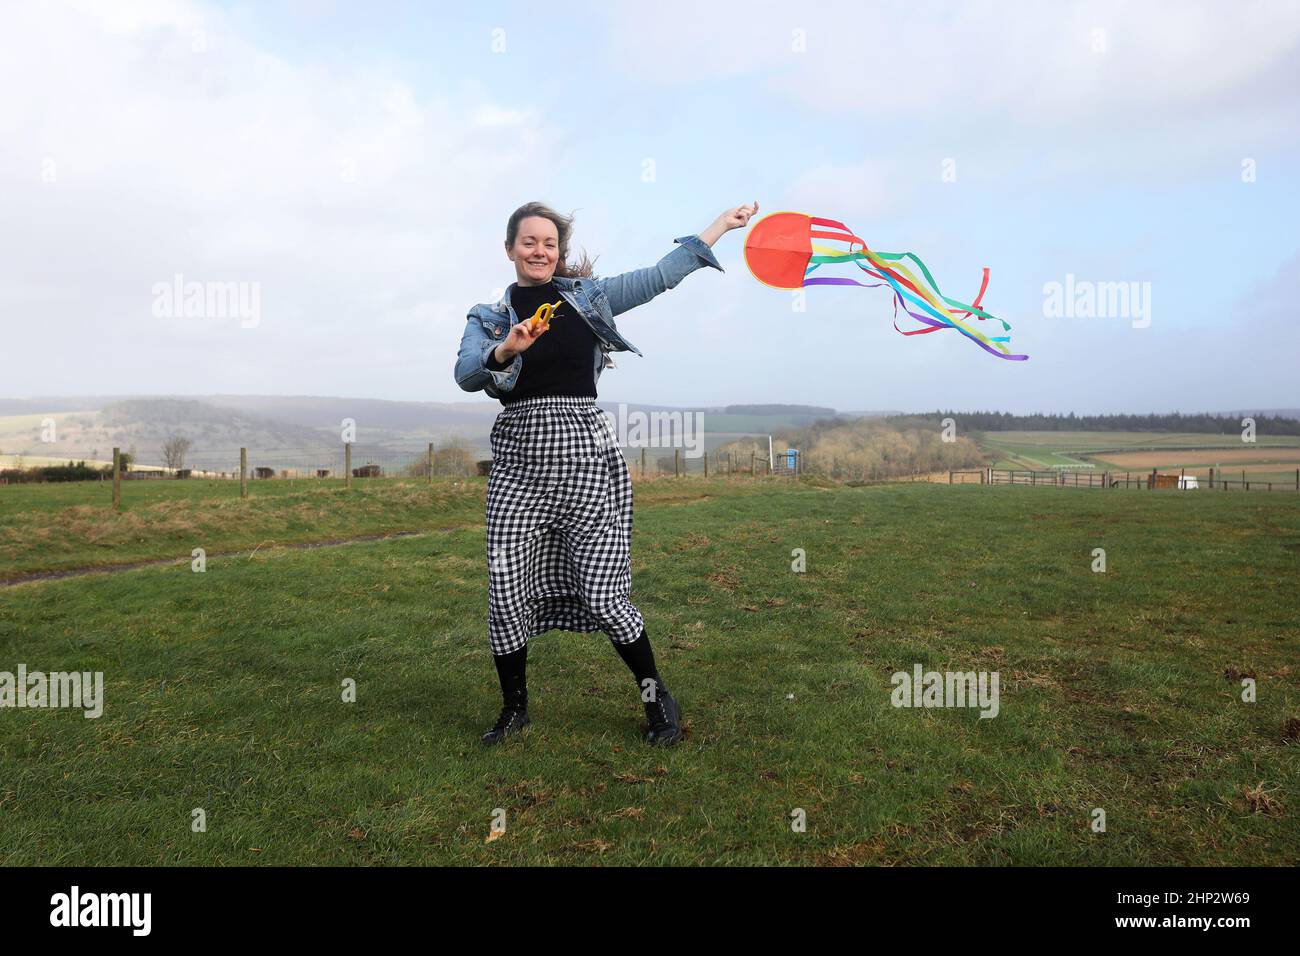 Chichester, West Sussex, UK. Kelly Daivs pictured braving Storm Eunice to fly a kite up on Goodwood hill, Chichester, UK. Credit: Sam Stephenson/Alamy Live News Stock Photo